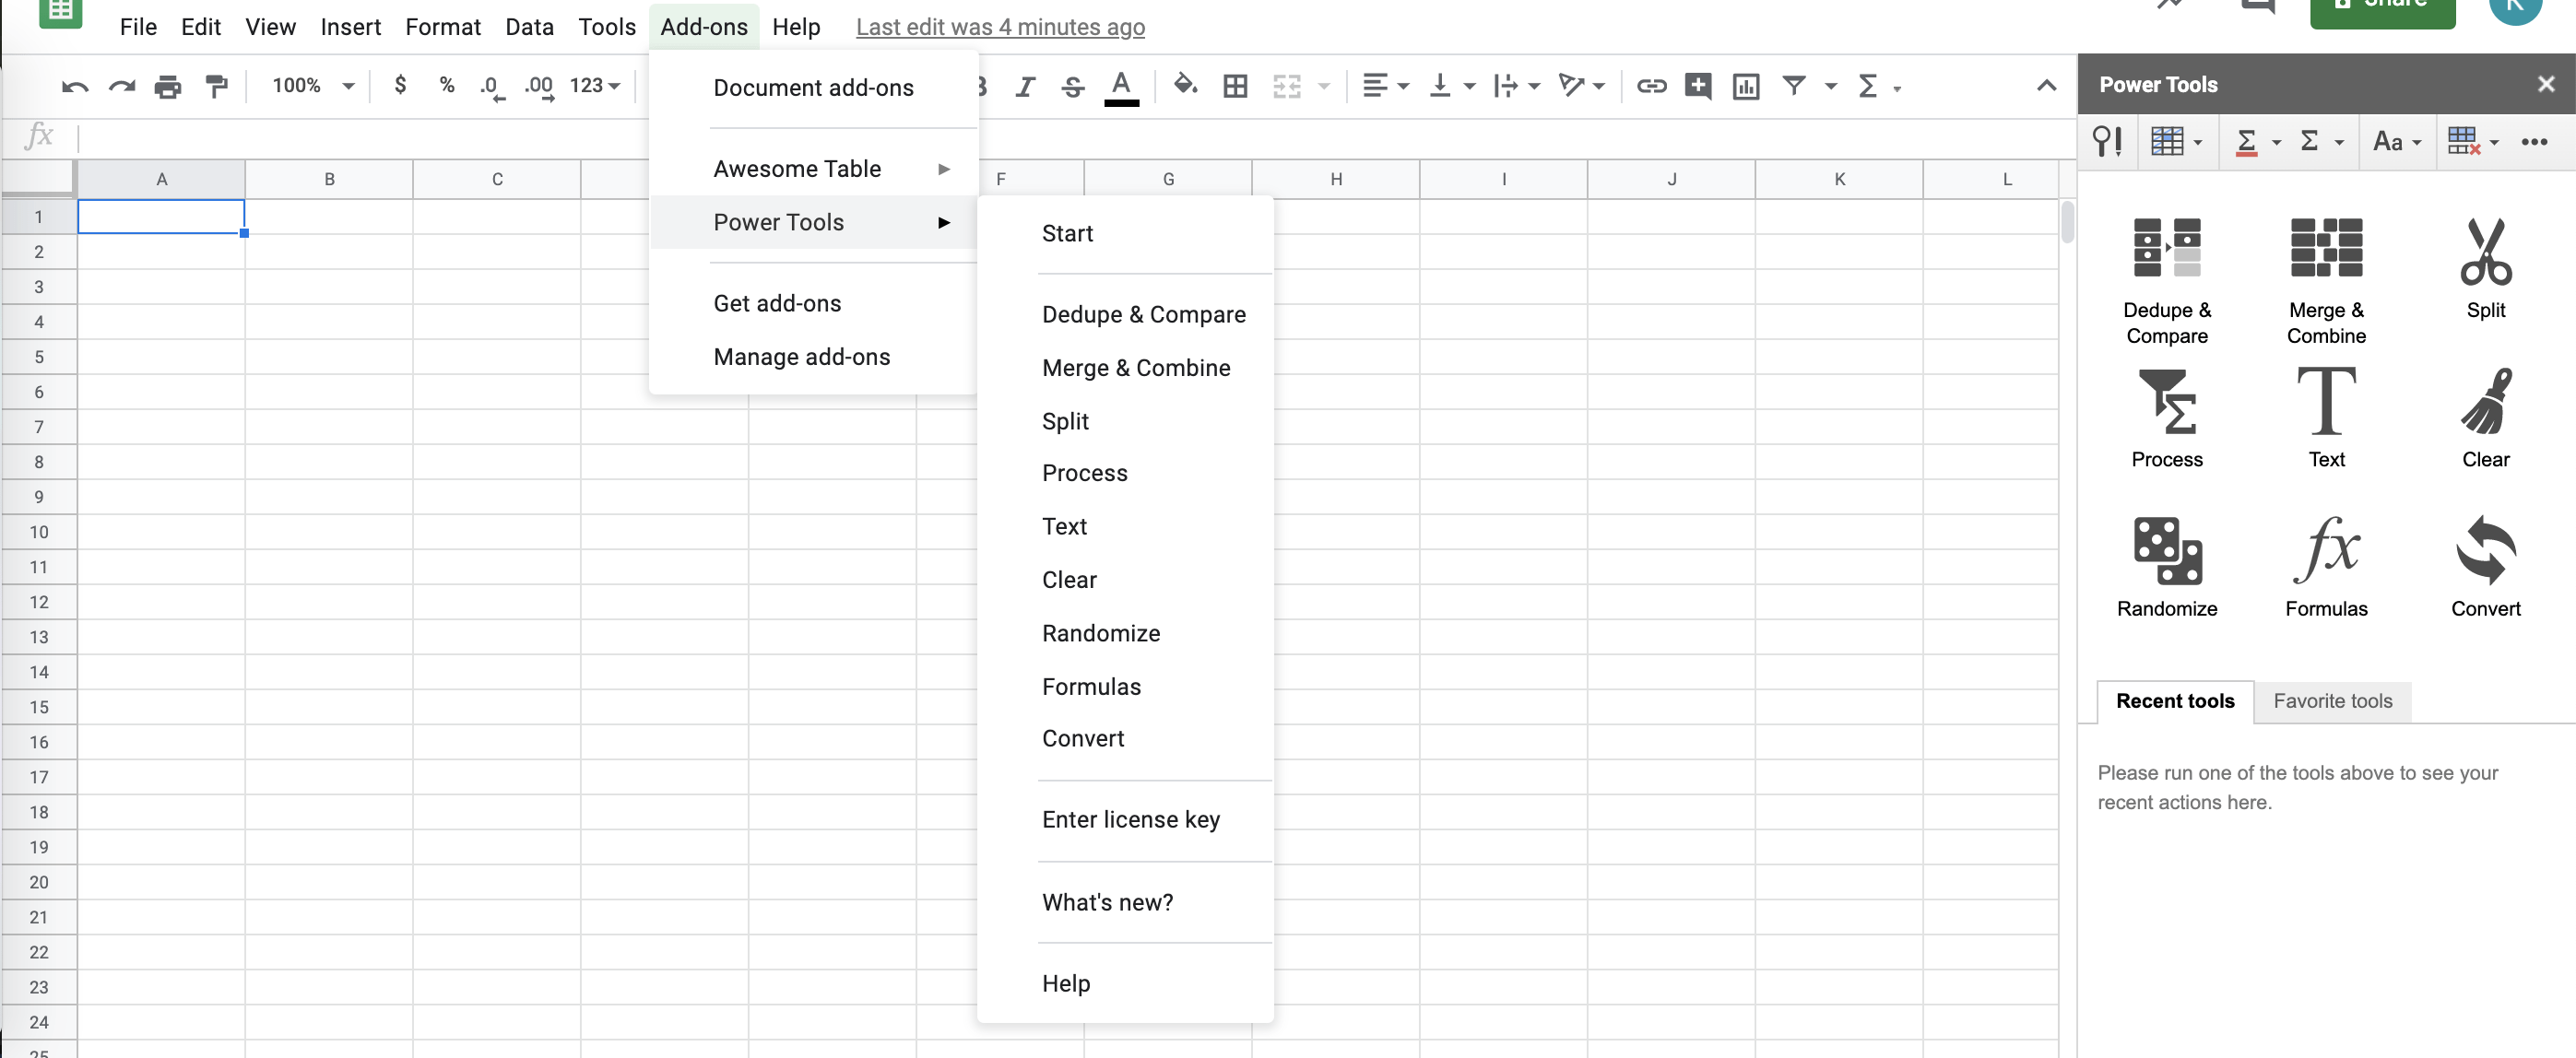 How to Remove Extra Characters from Strings in Google Sheets